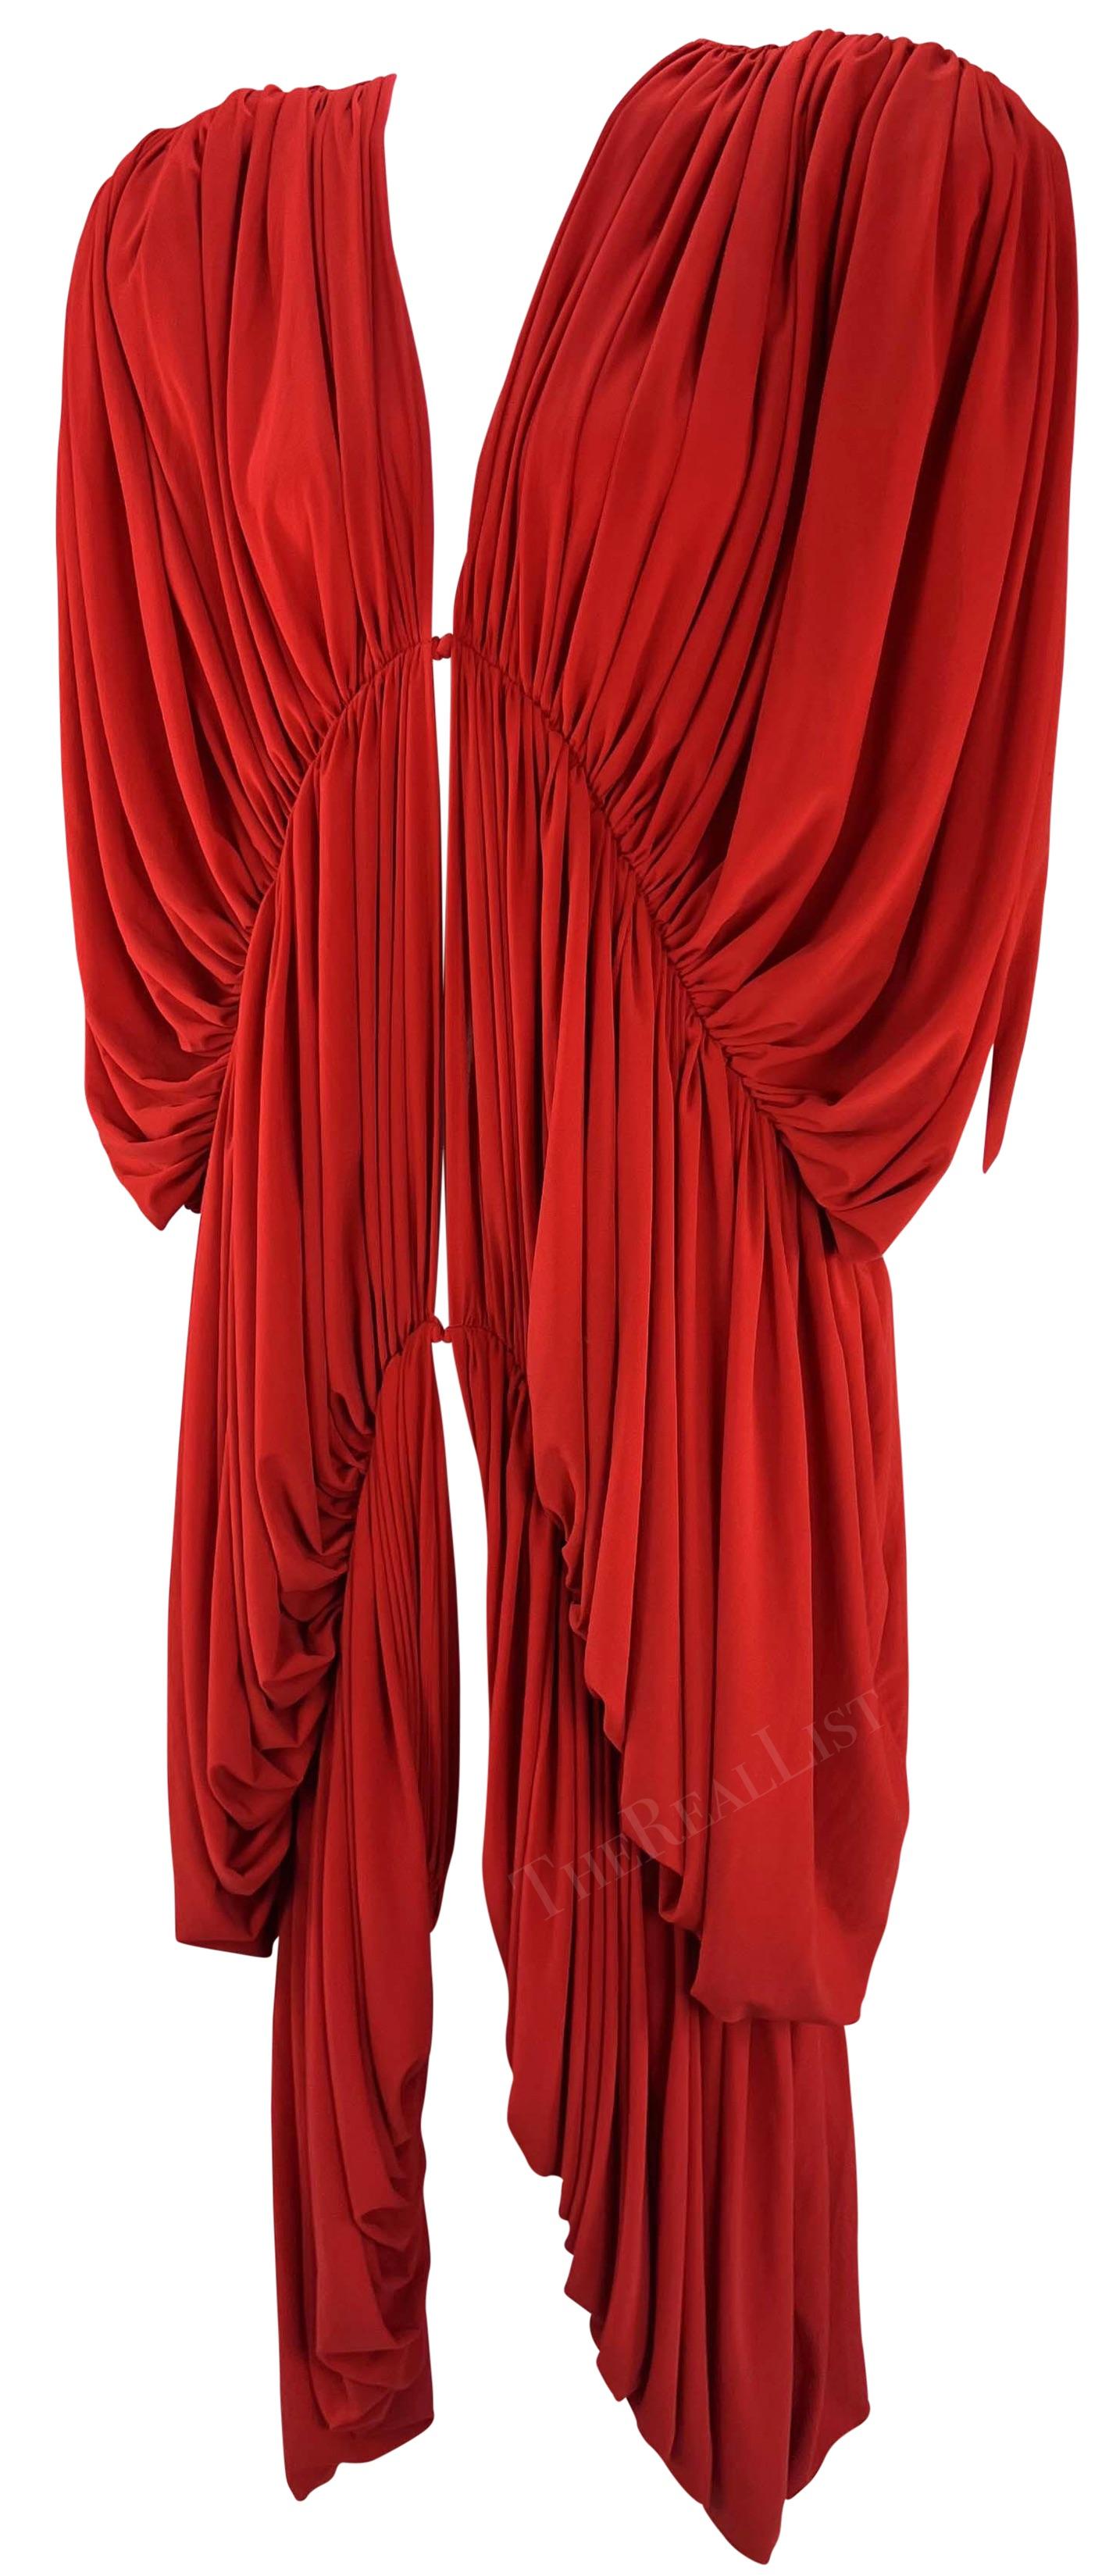 TheRealList presents: a bold red Norma Kamali parachute dress. From the early 1980s, this oversized dress features a plunging v-neckline, shoulder pads, and pleating throughout. This daring bright red dress features hook and eye closures down the